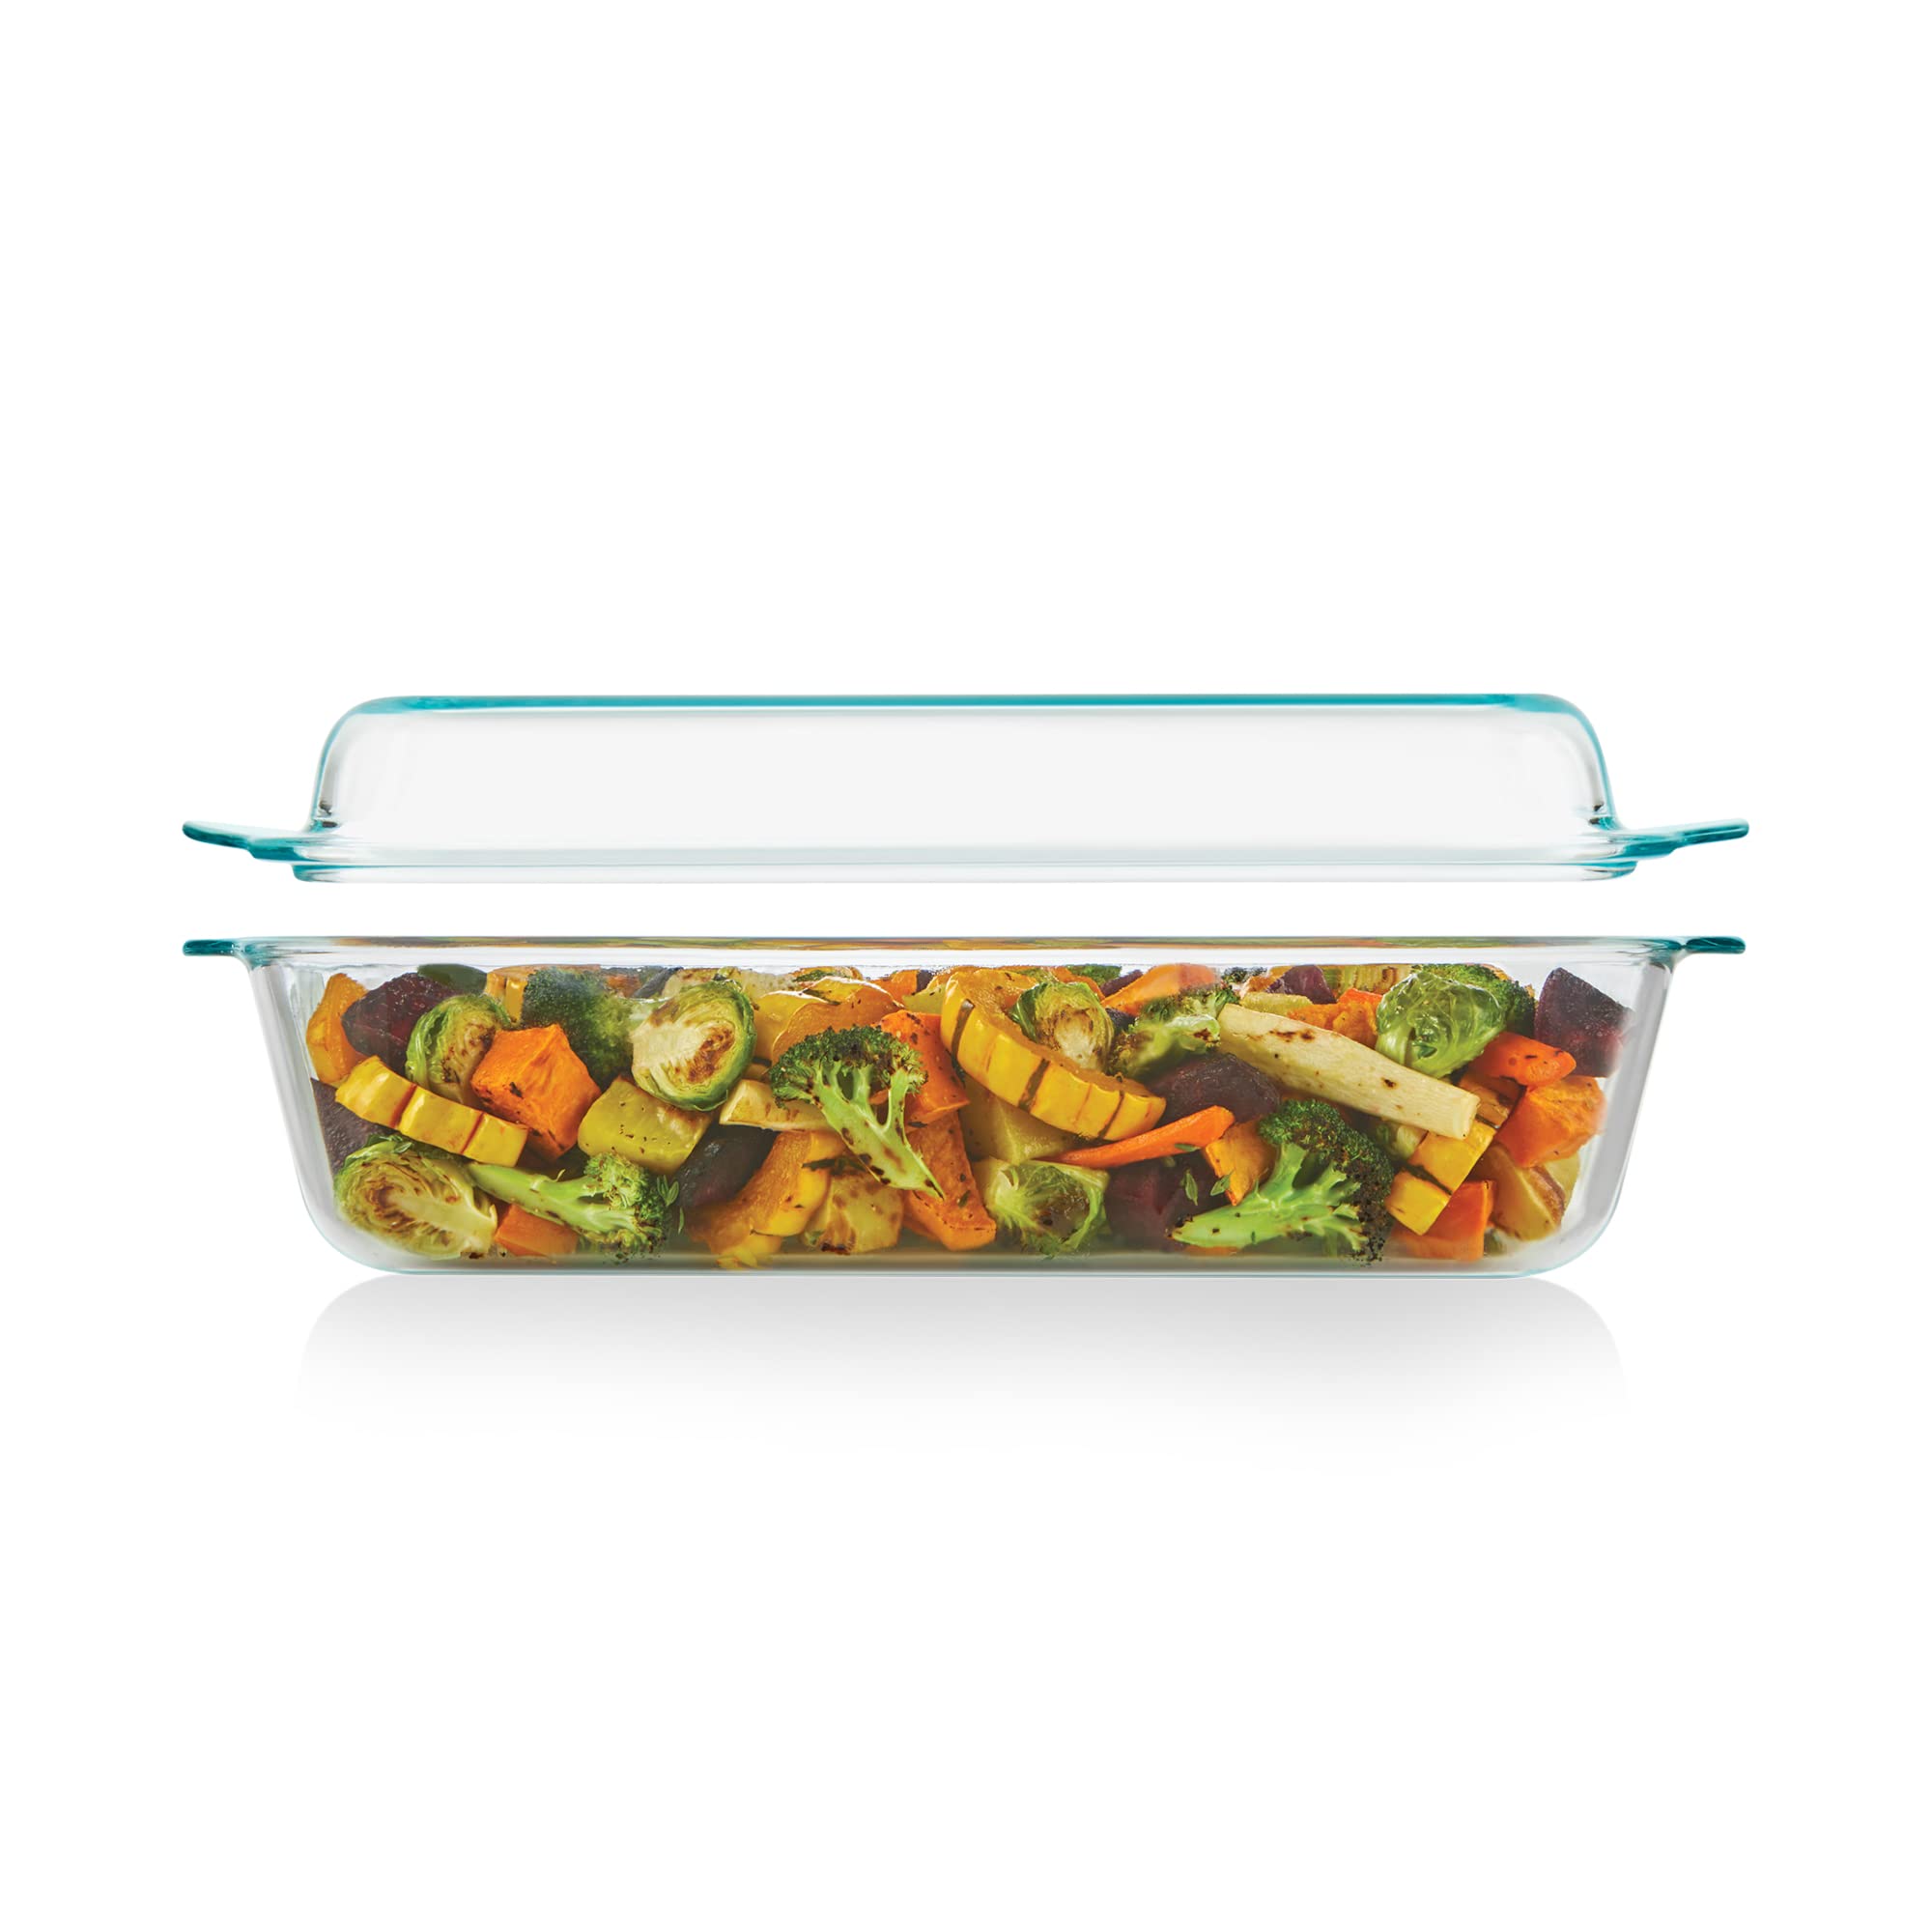 Pyrex Deep 5.2-Qt (9"x13") 2-in-1 Glass Baking Dish with Glass Lid, Extra Large Rectangular Baking Pan For Casserole & Lasagna, Dishwasher, Freezer, Microwave and Pre-Heated Oven Safe